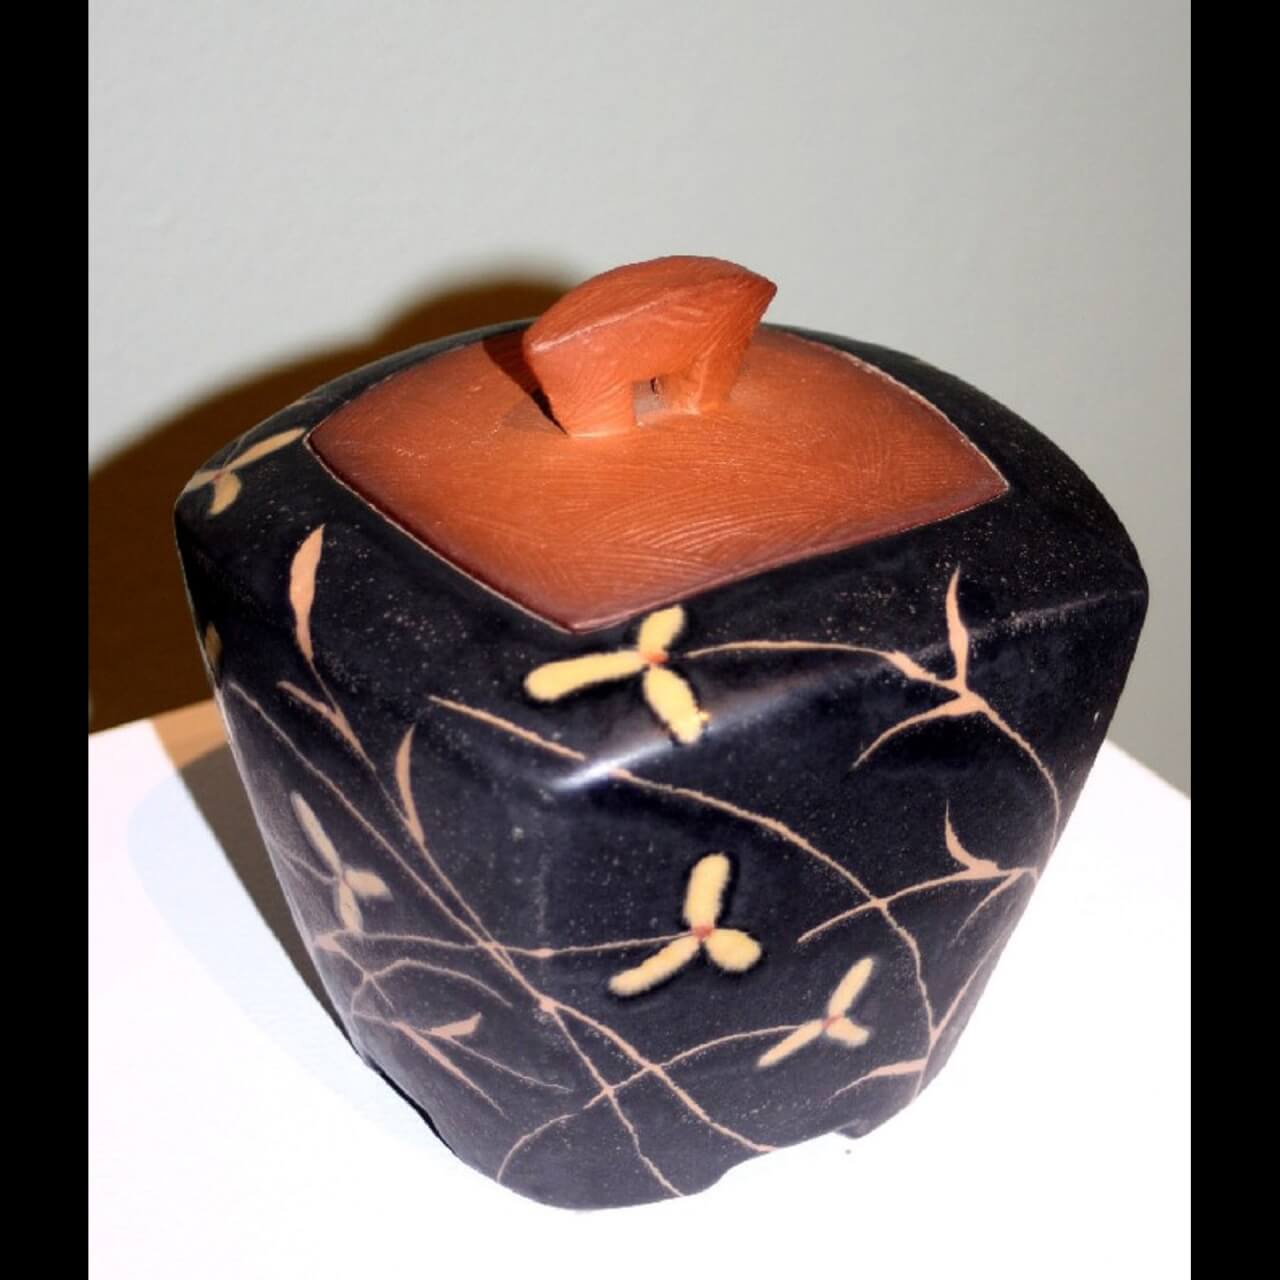 square jar made of red clay and decorated with floral design in black gaze